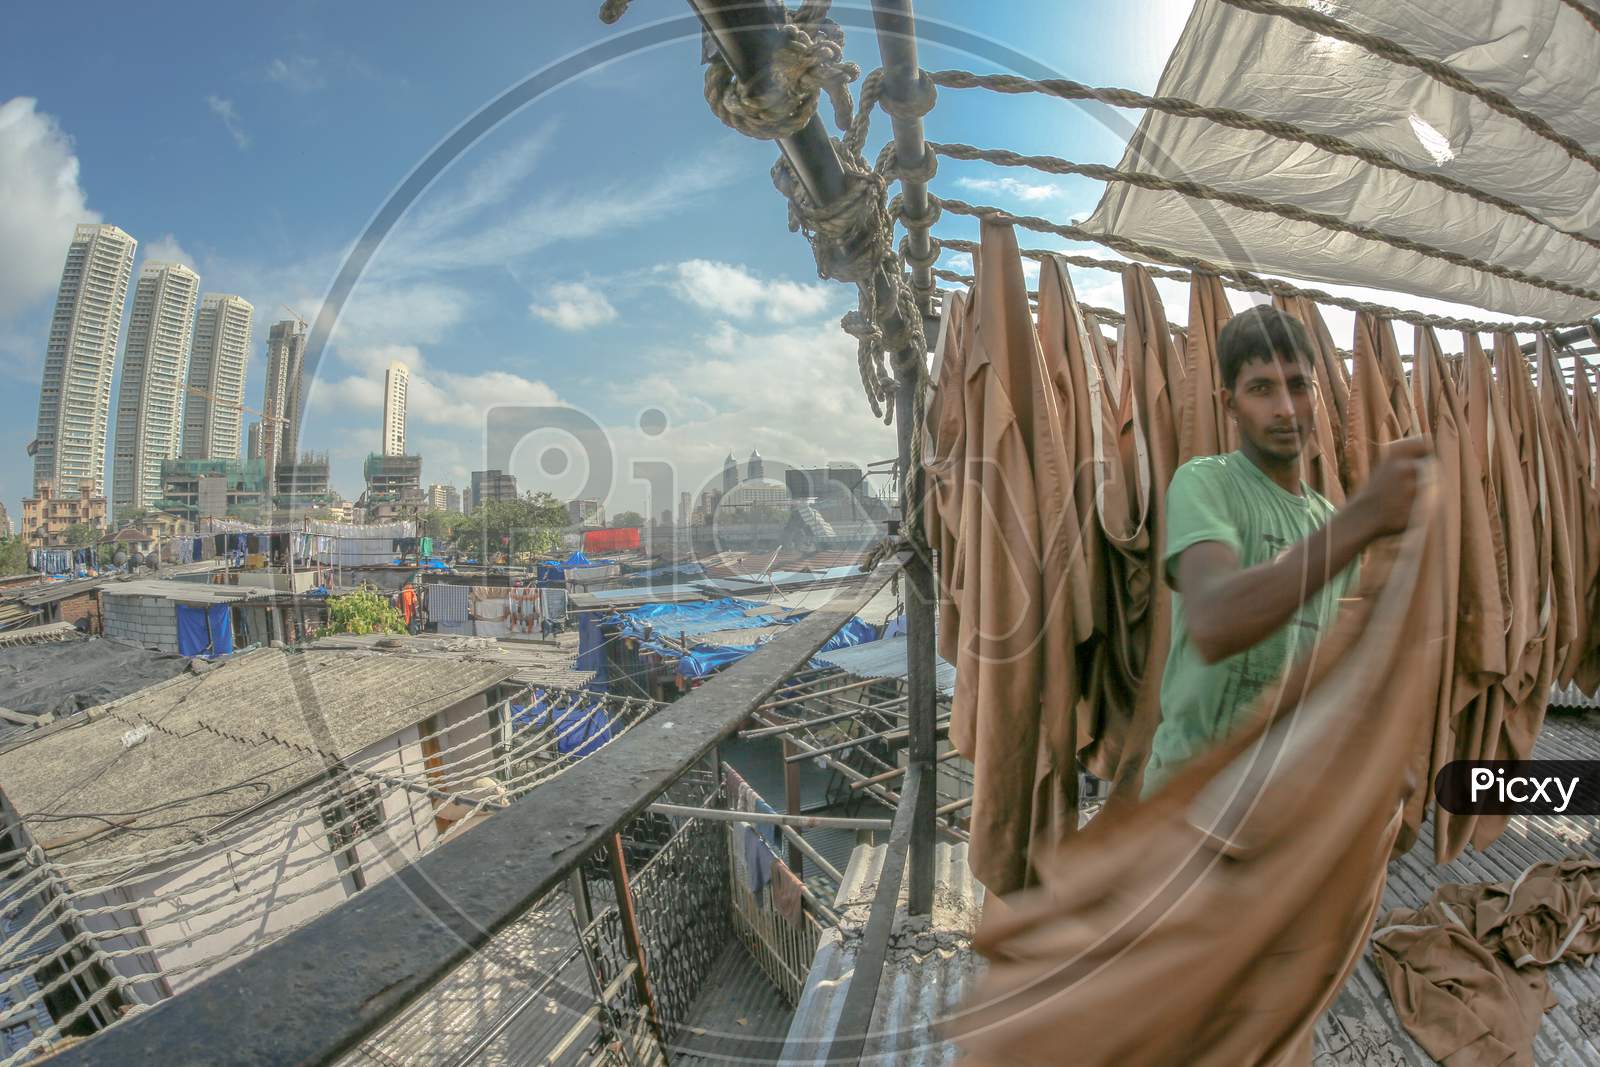 A Washerman or Dhobi Washing Clothes in an Urban City